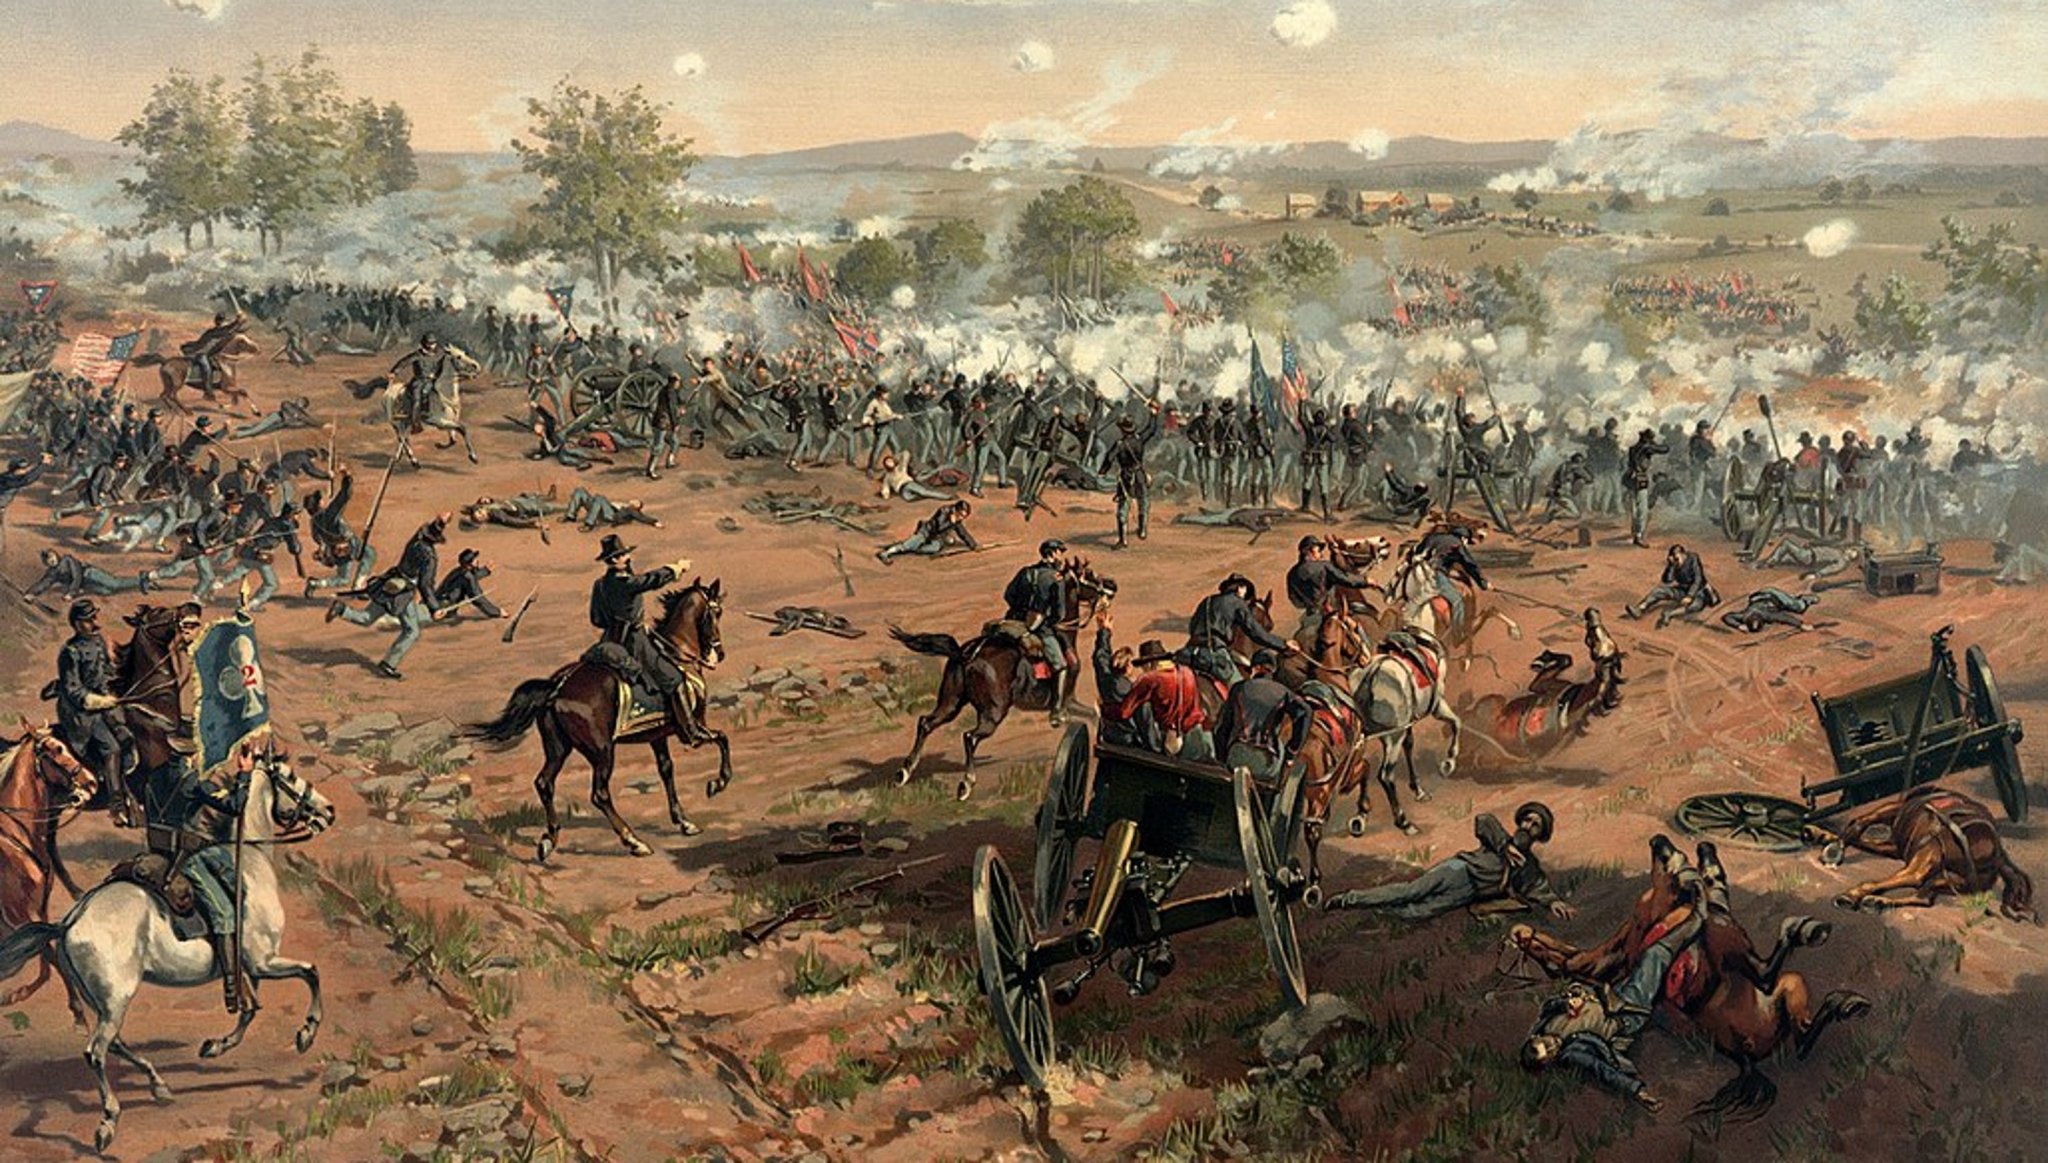 Interesting Facts about the Battle of Gettysburg Most People Don't Know